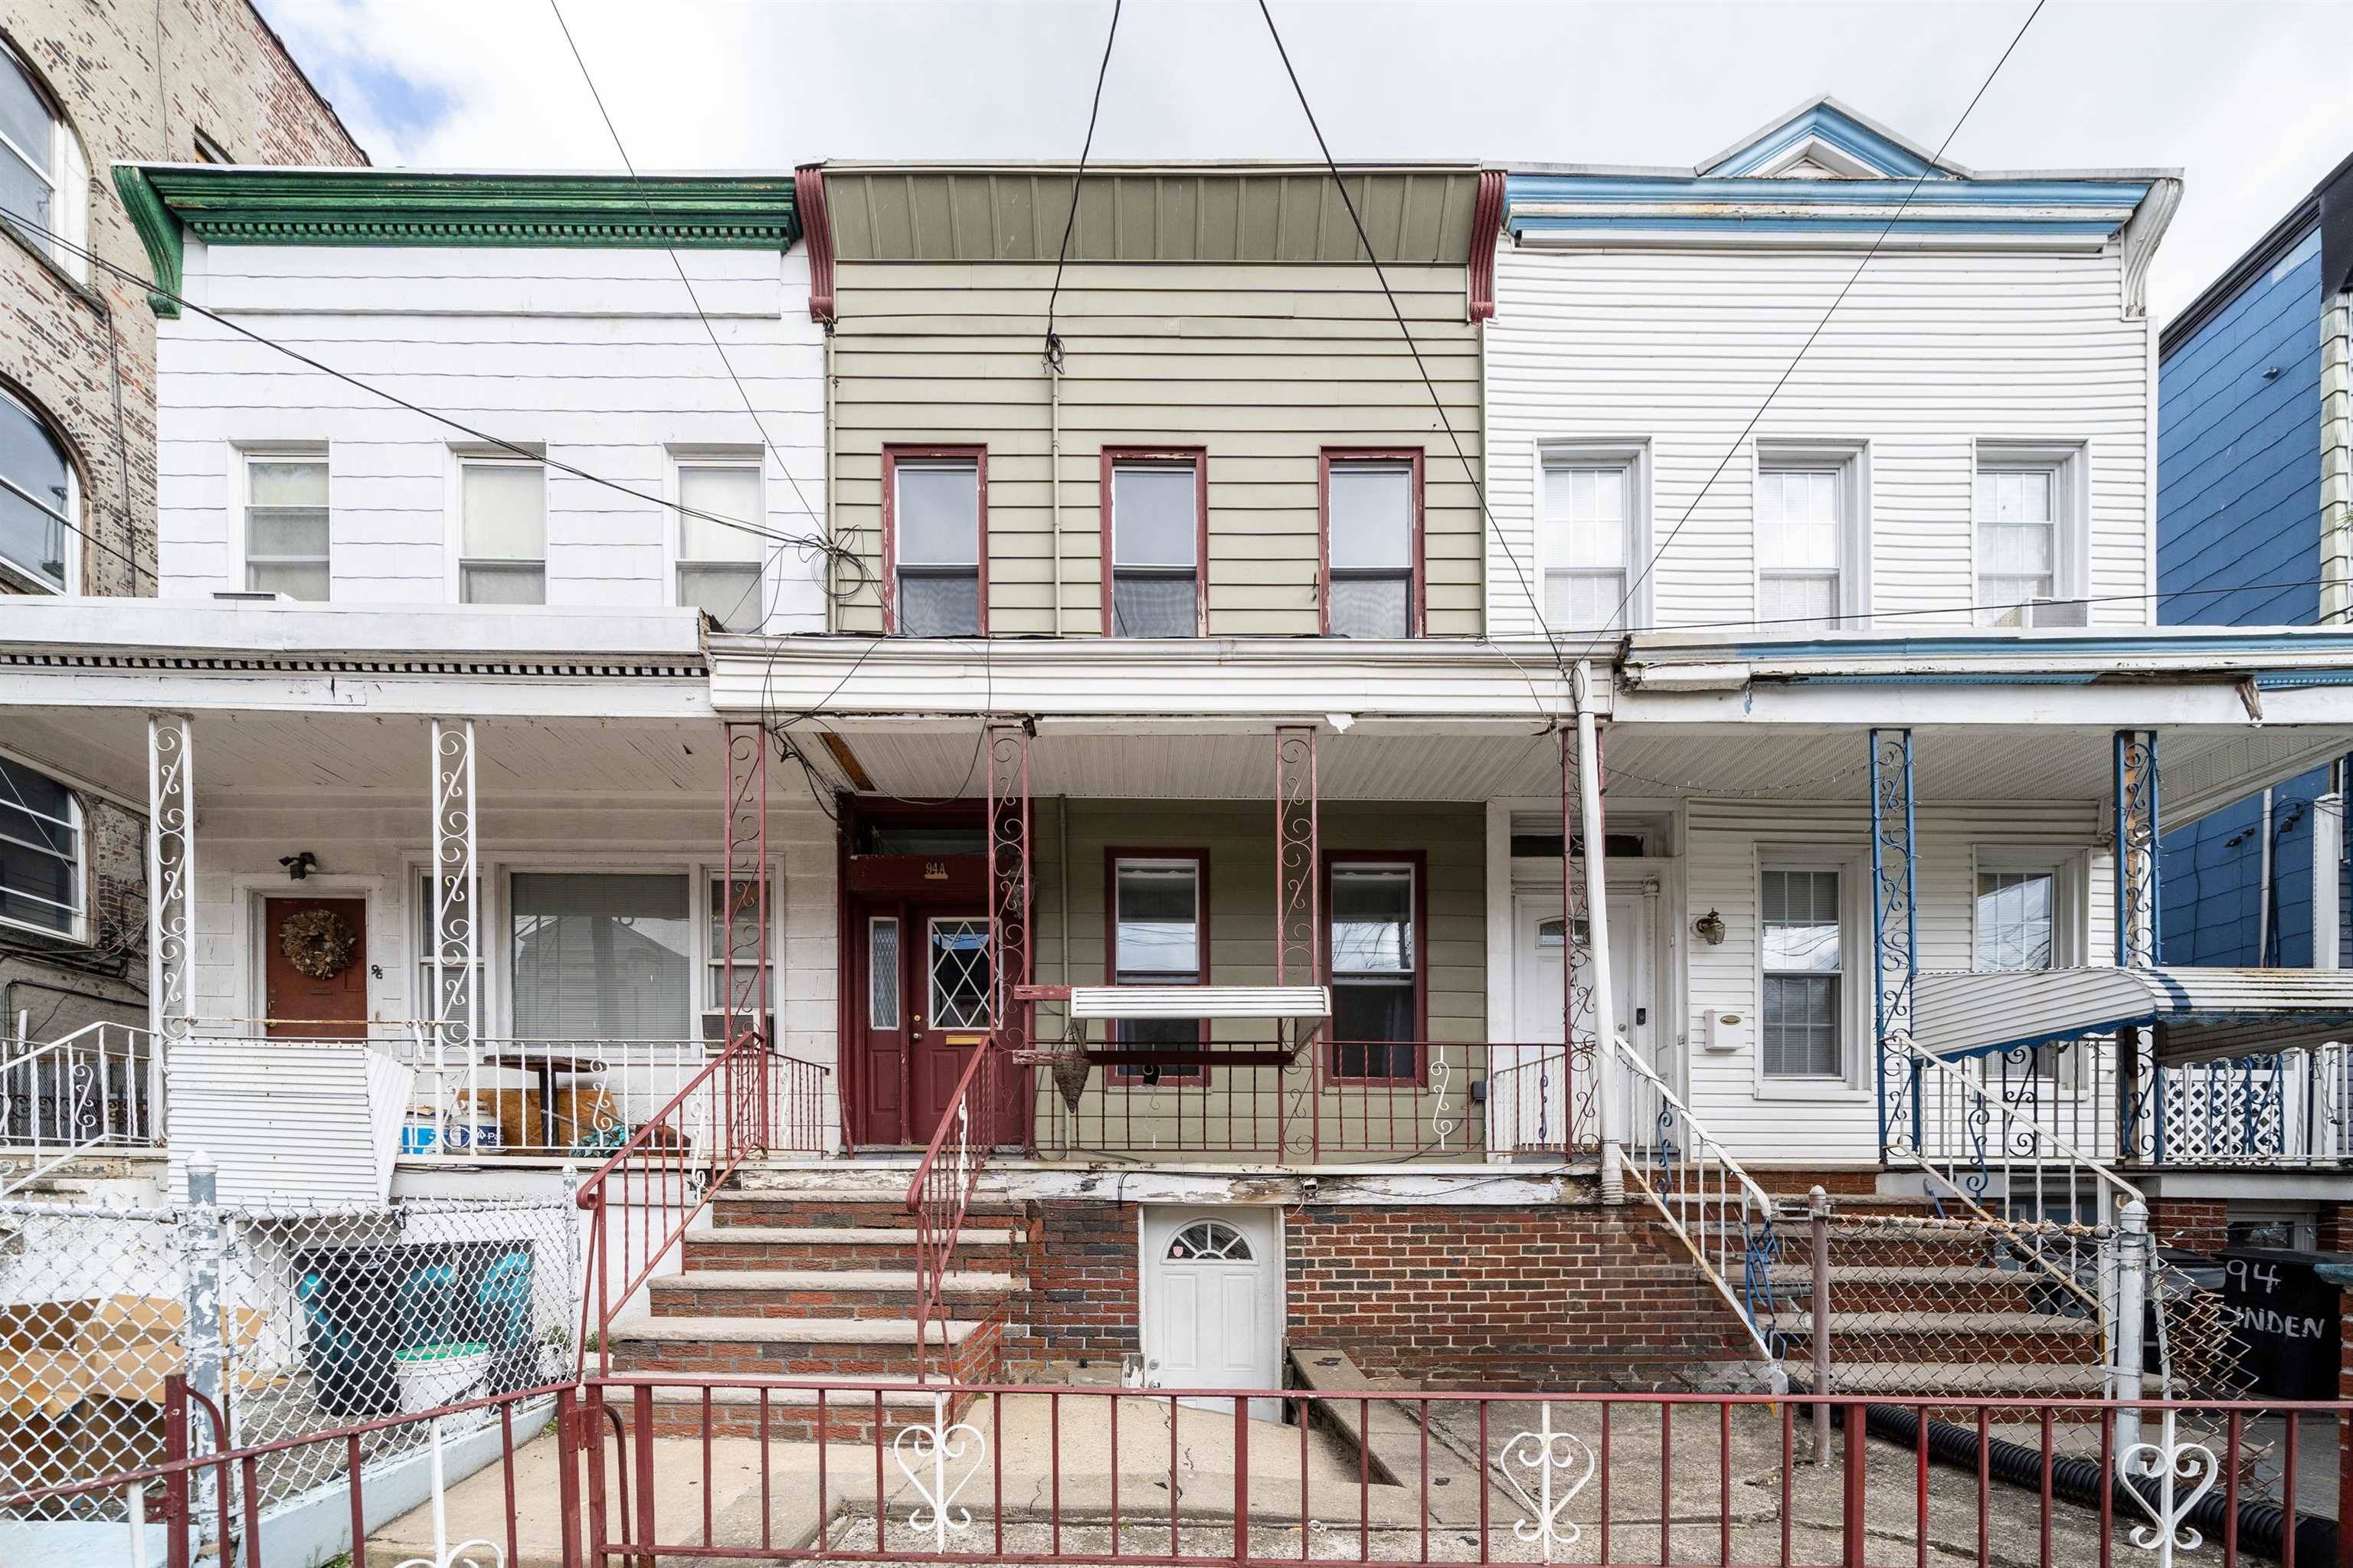 94A LINDEN AVE Multi-Family New Jersey